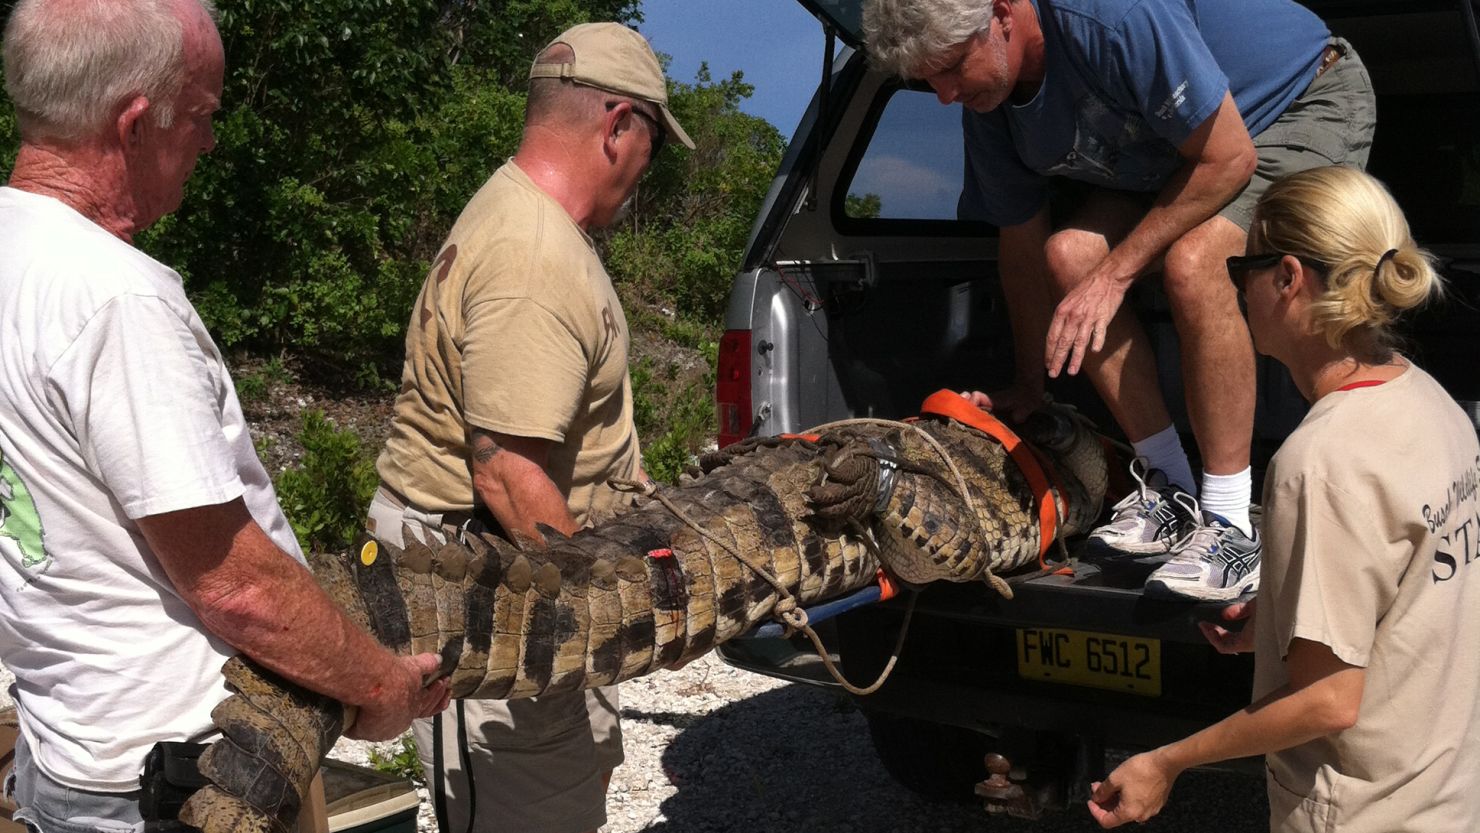 The state of Florida is hiring more crocodile response agents to handle complaints from residents.